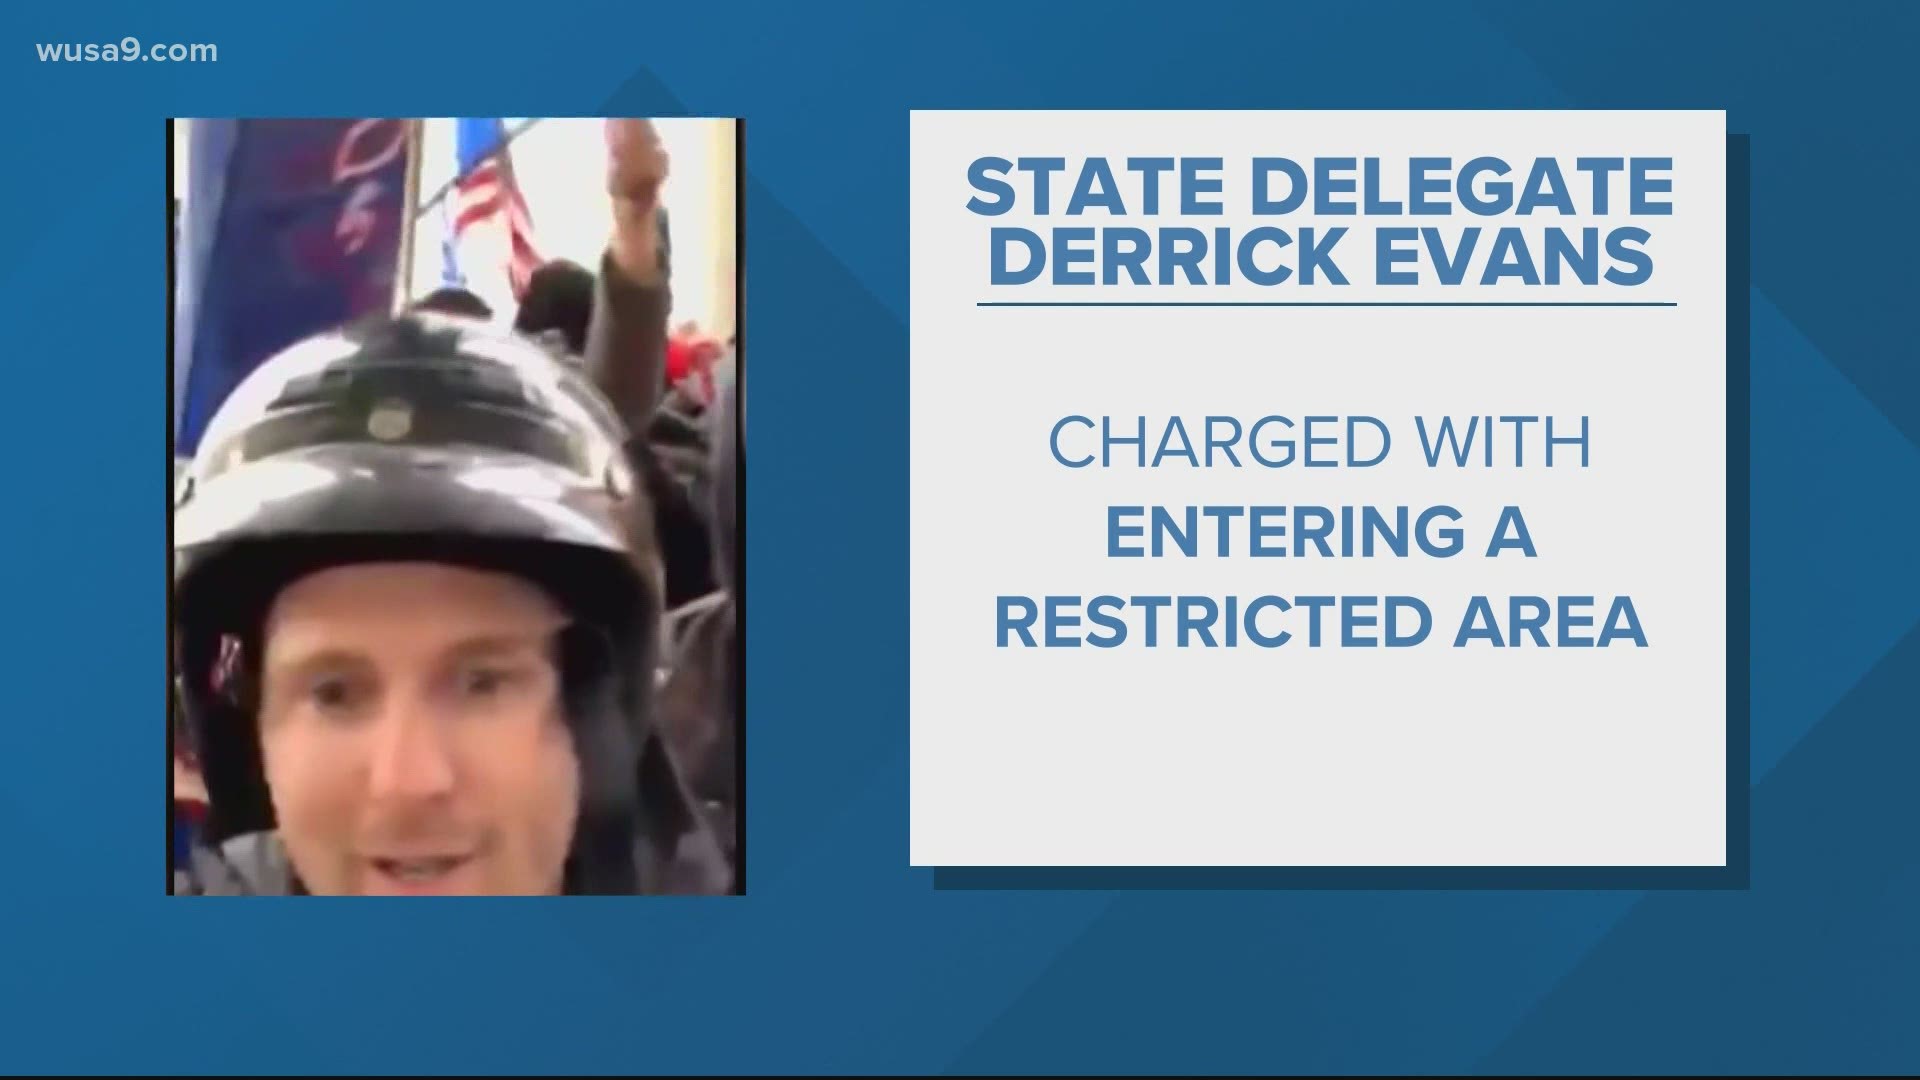 Evans filmed himself and supporters of President Trump storming the US Capitol. Evans is now charged with entering a restricted area.